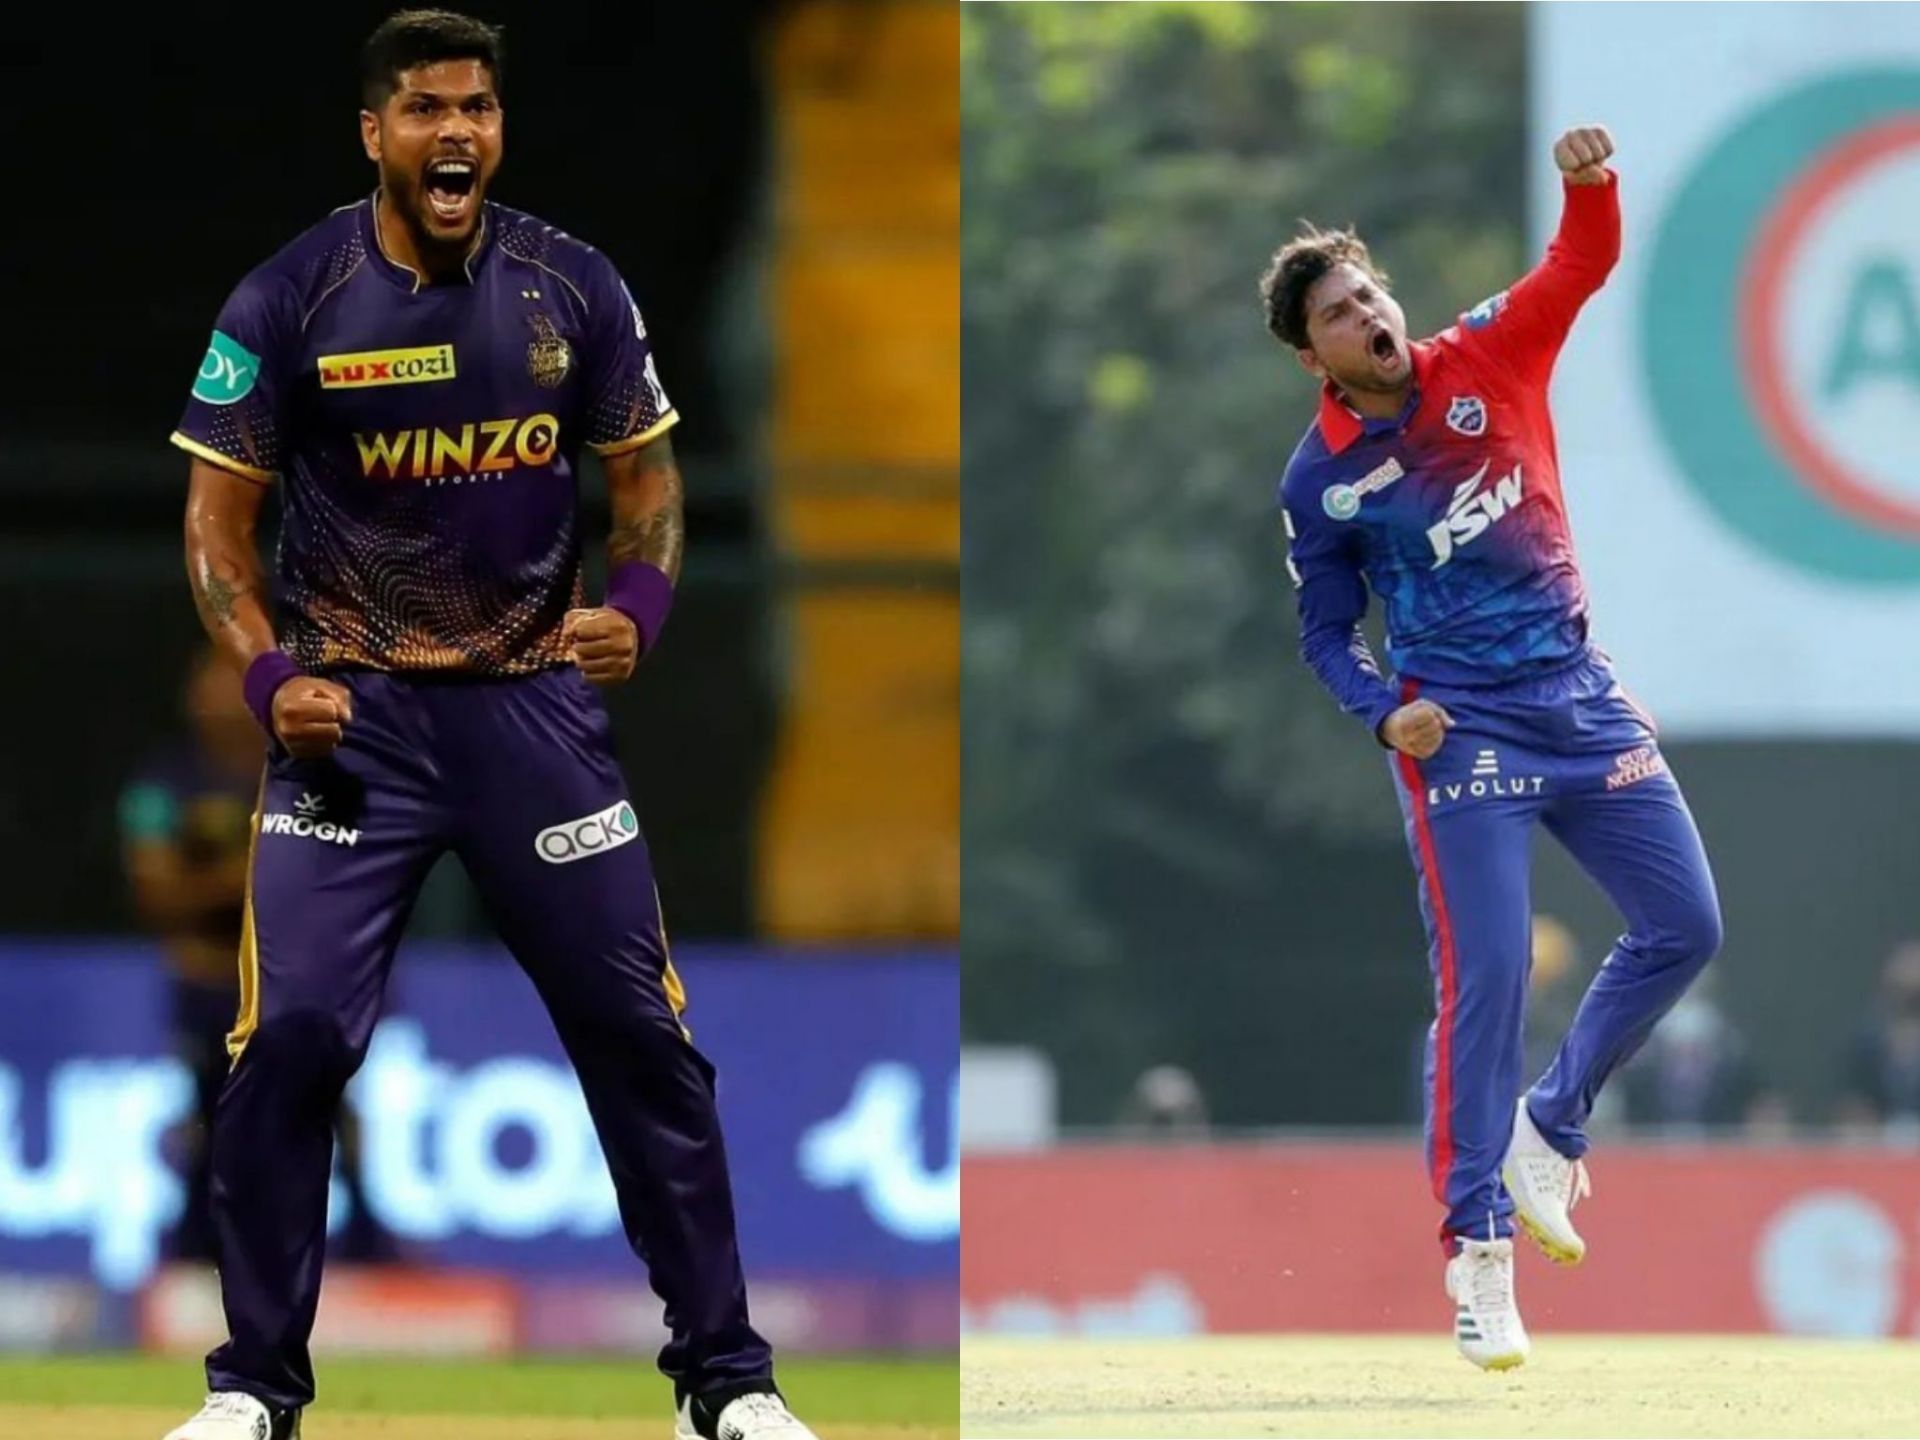 Match 41 of the IPL 2022 will be played between the Delhi Capitals and Kolkata Knight Riders